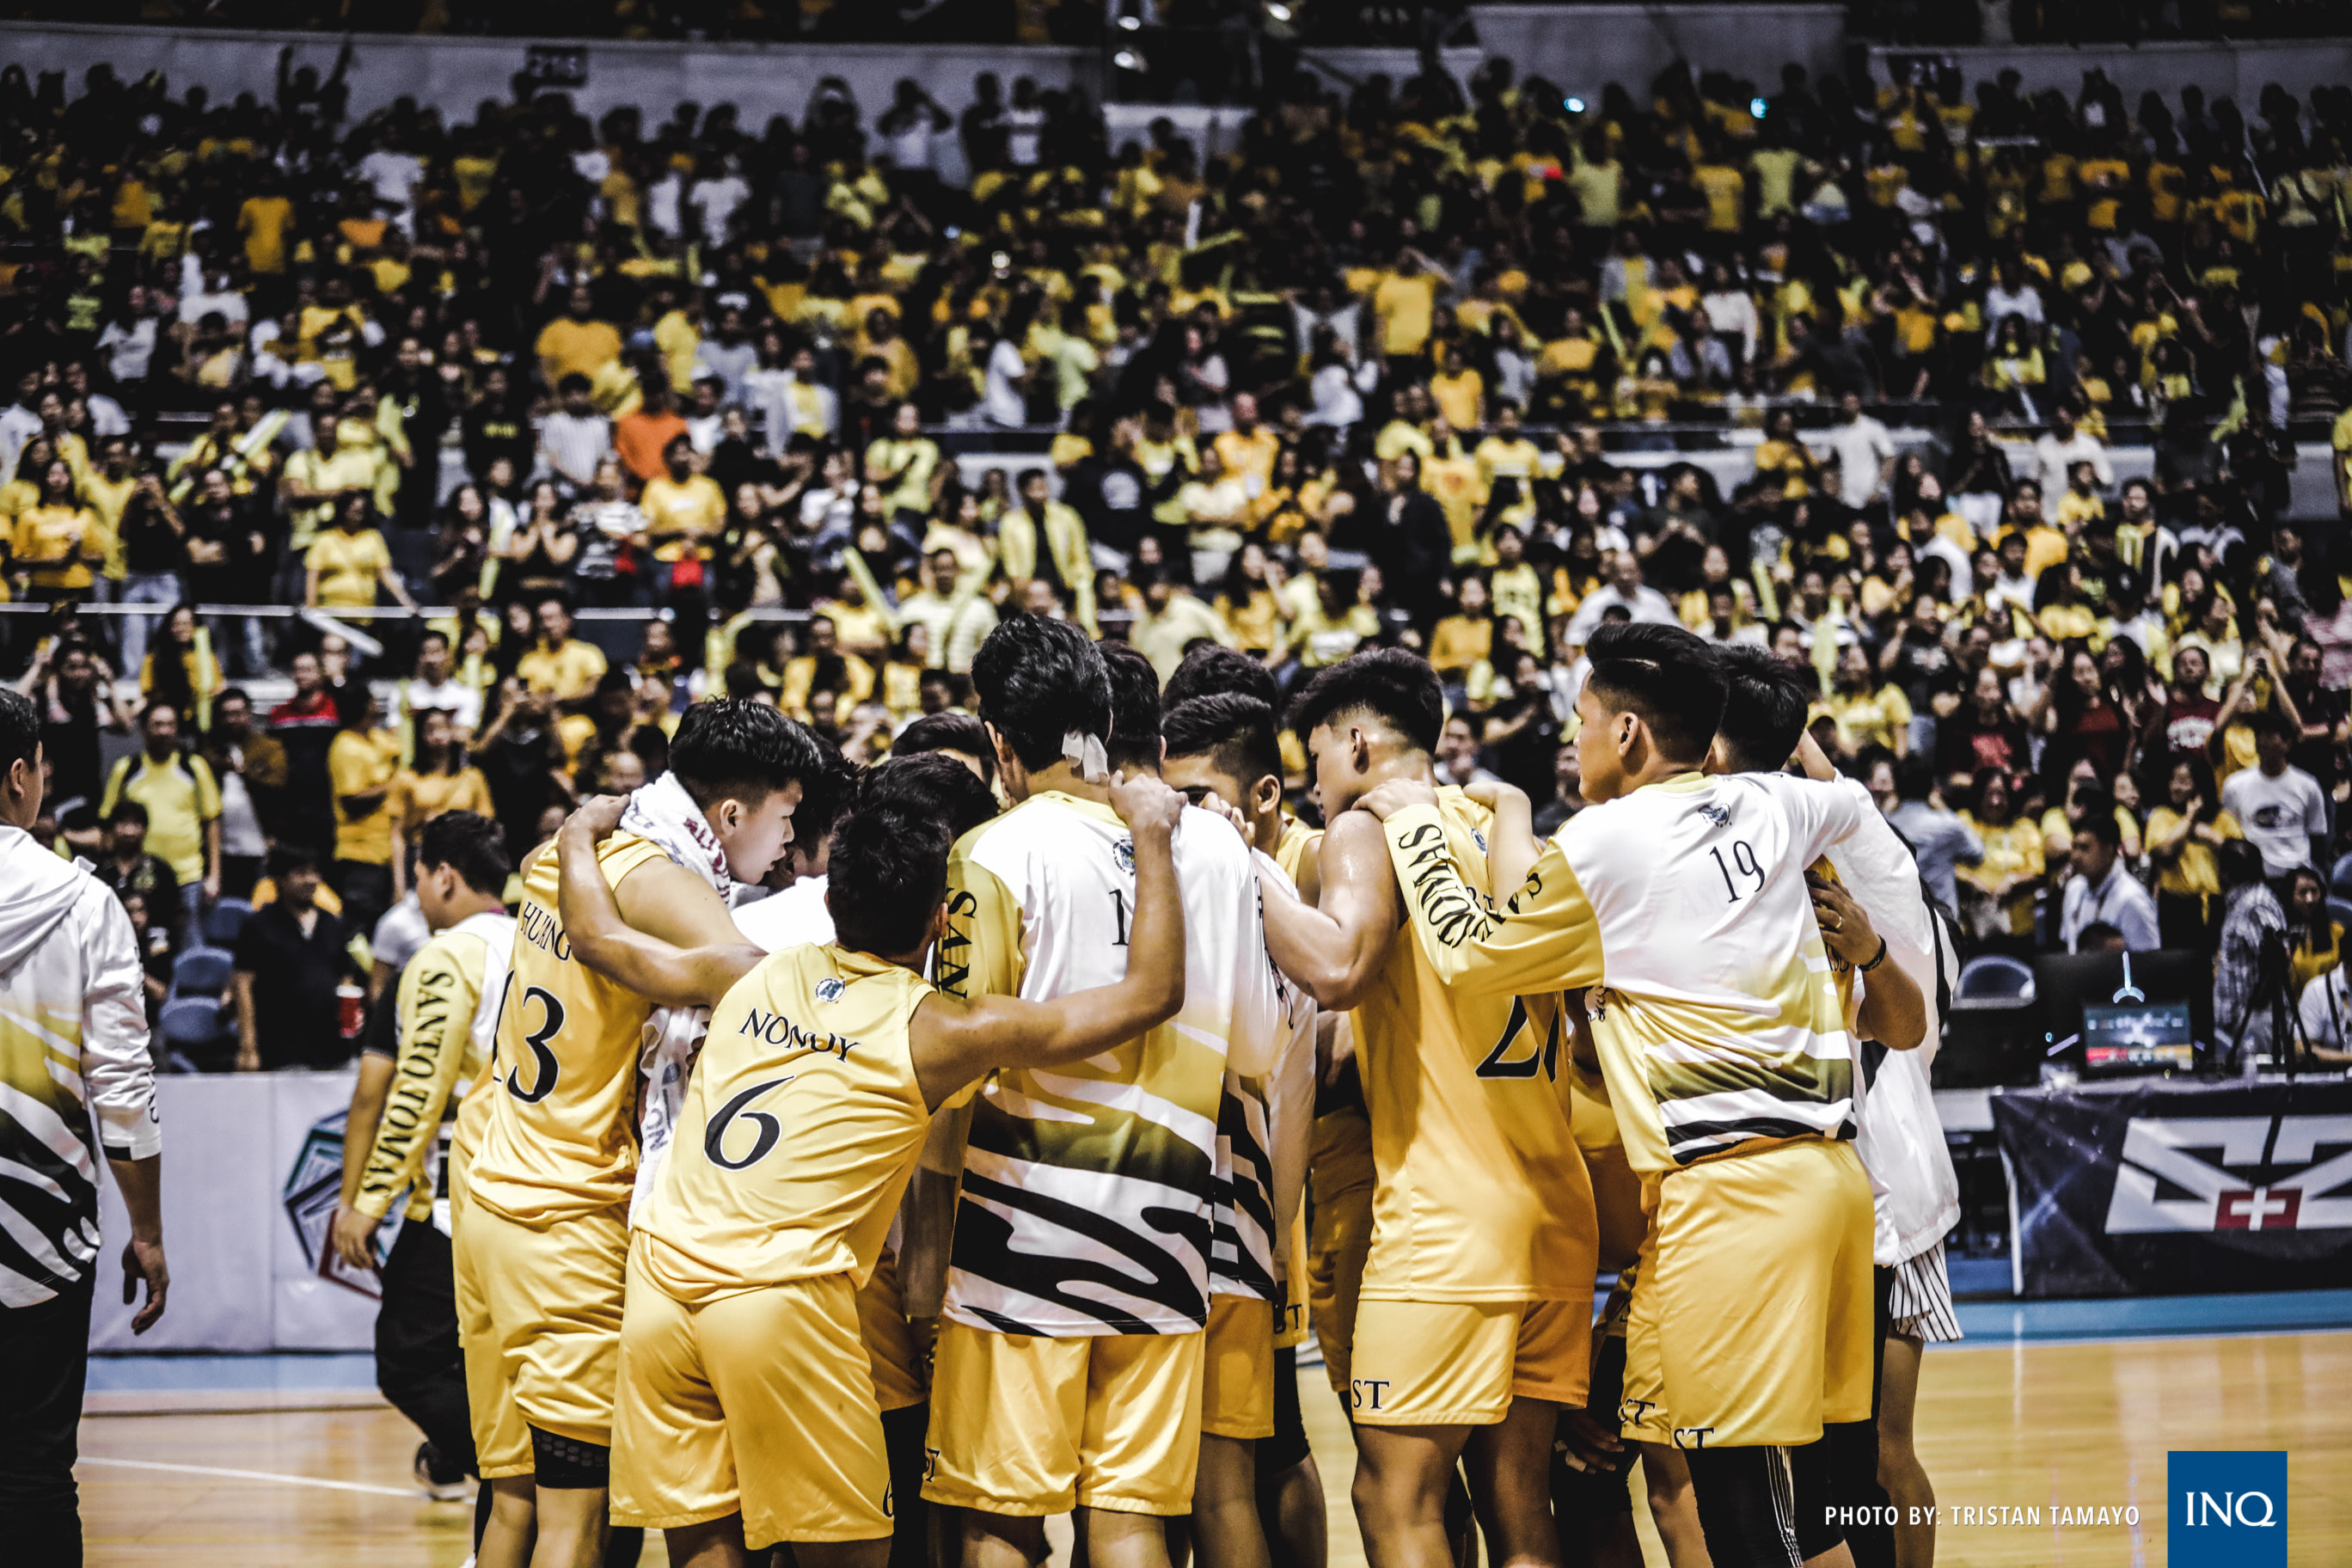 Ex-MBA player also applies for UST coaching job | Inquirer Sports